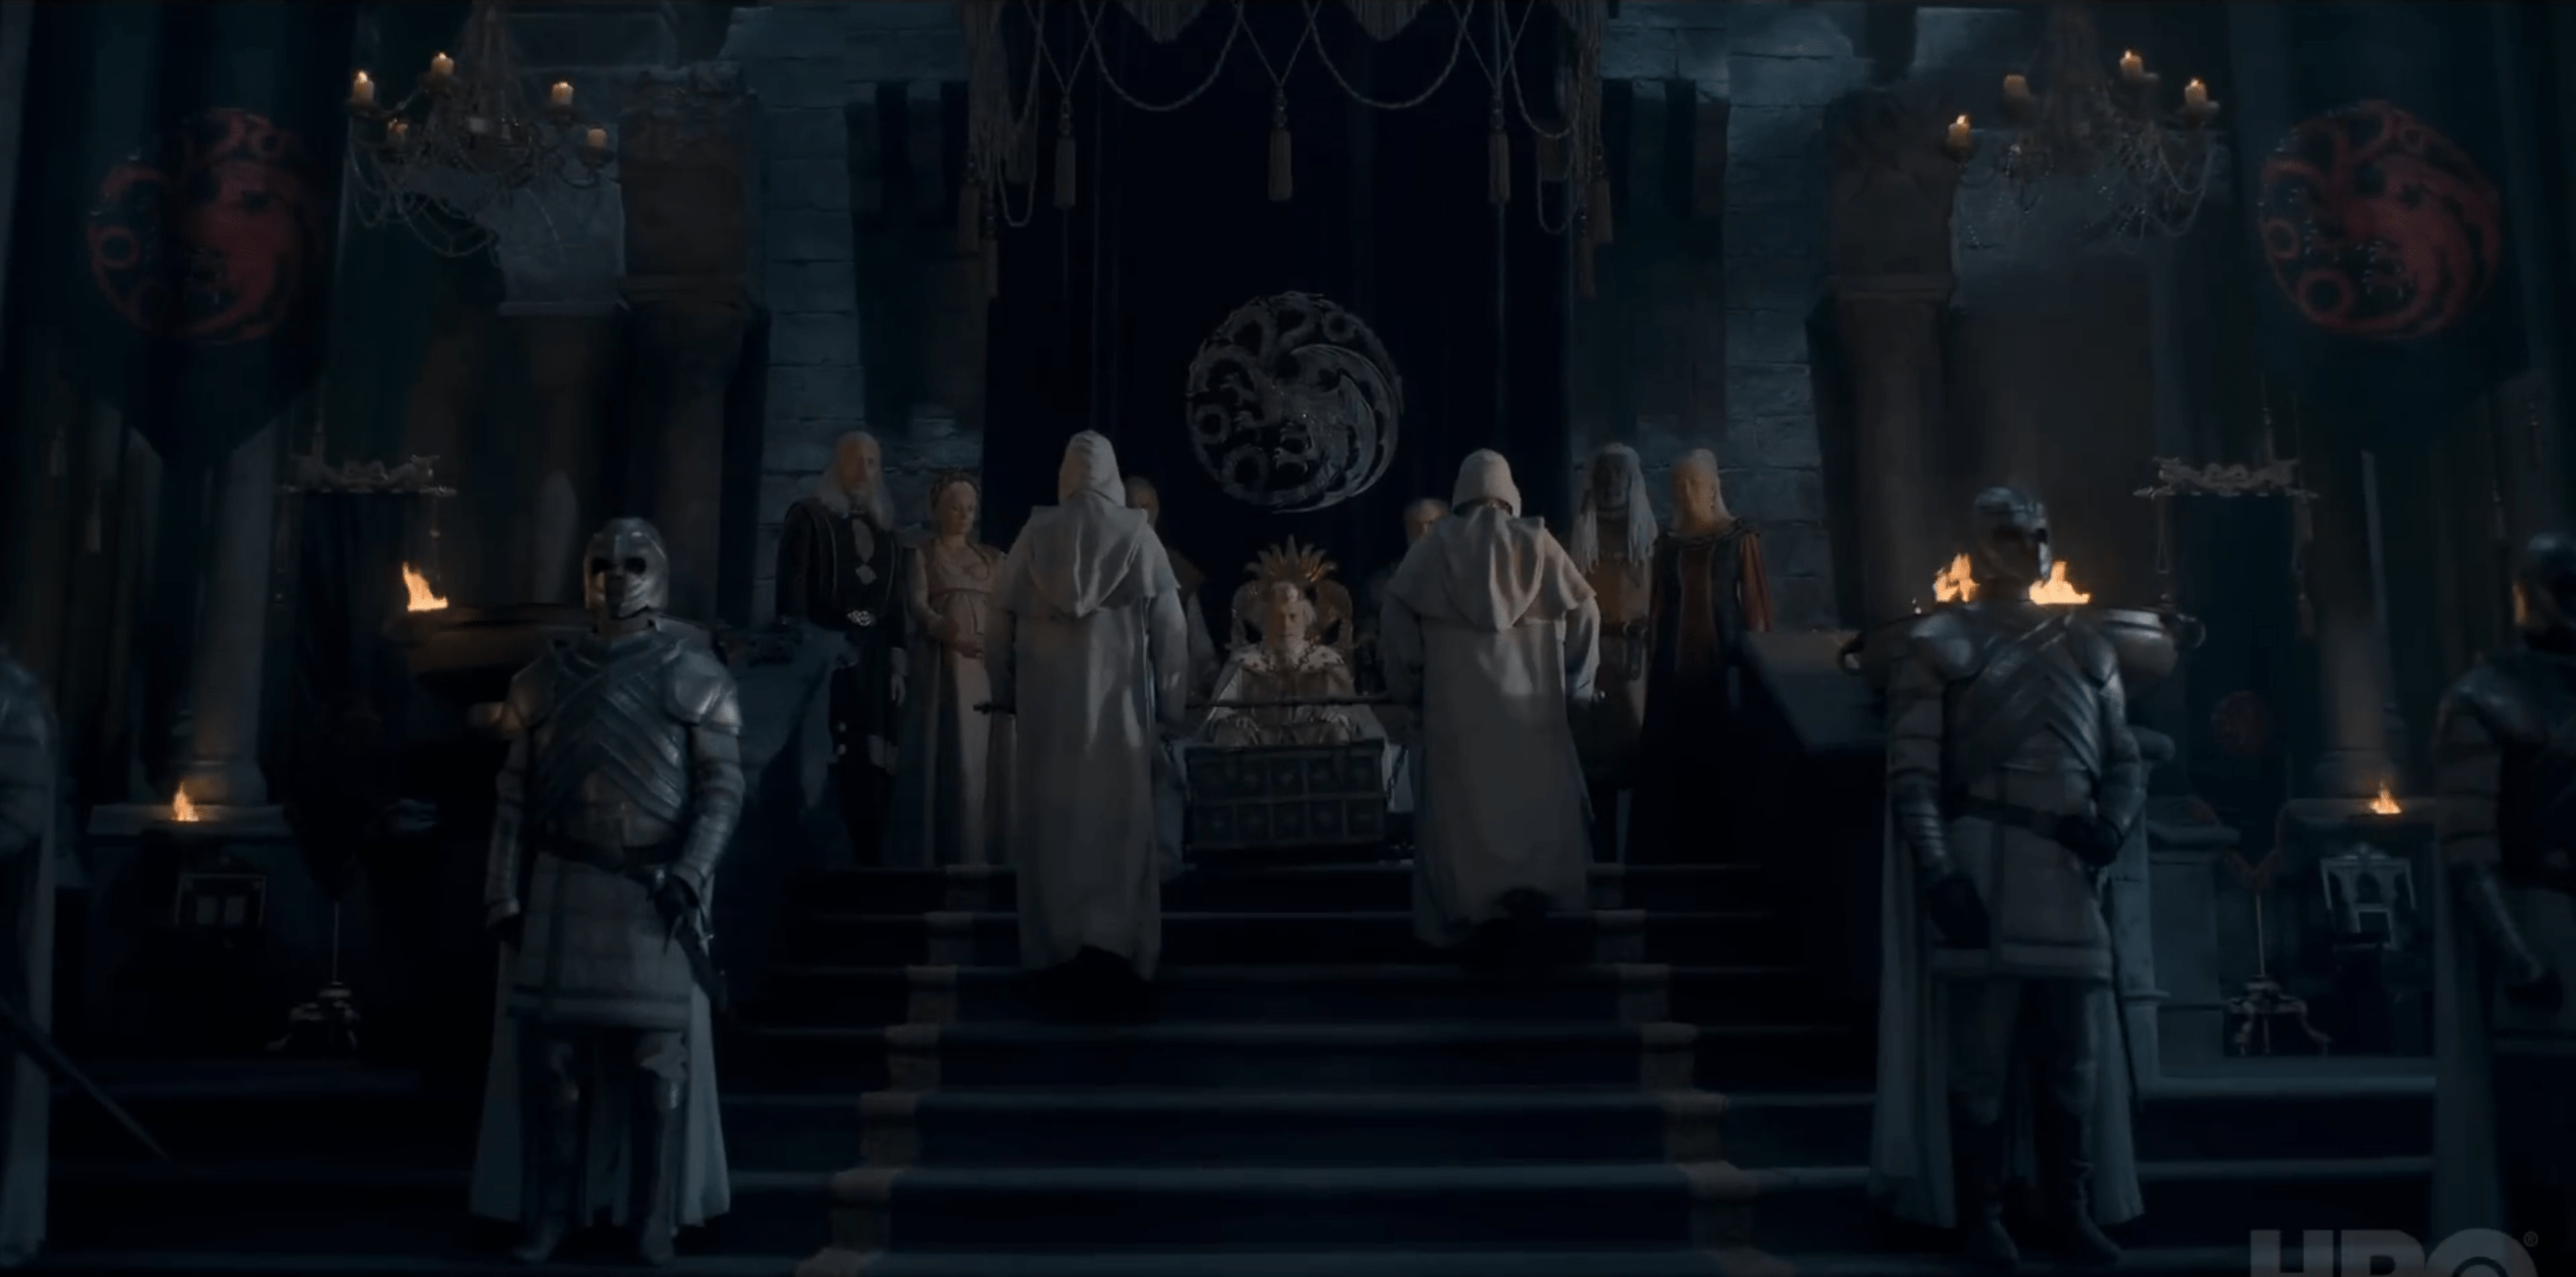 The Great Council of Harrenhal!